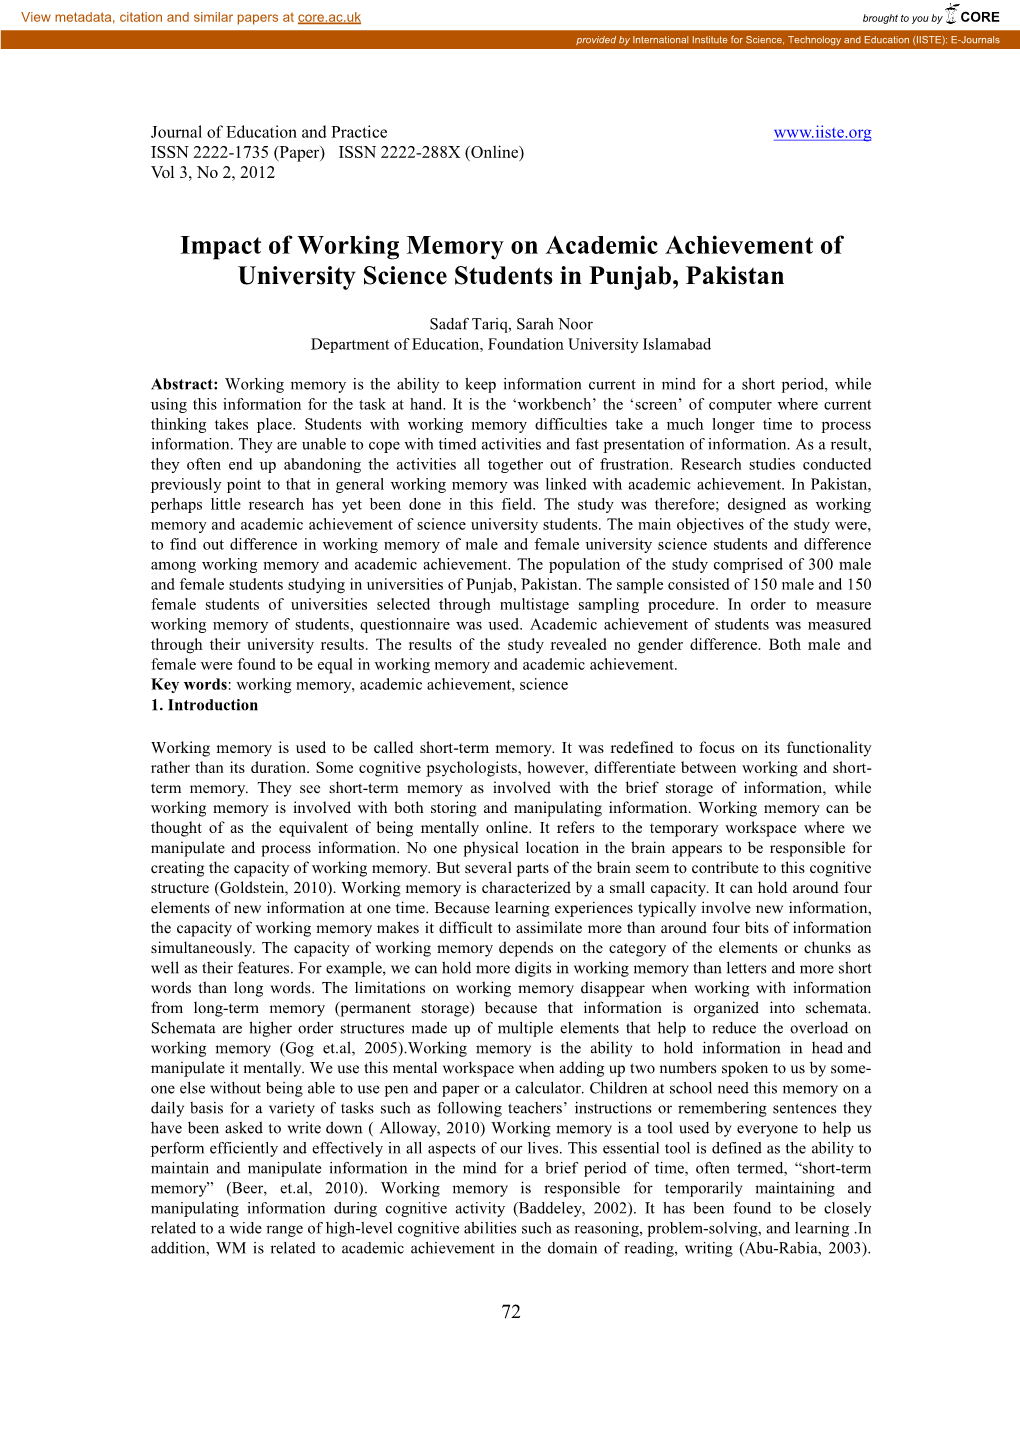 Impact of Working Memory on Academic Achievement of University Science Students in Punjab, Pakistan